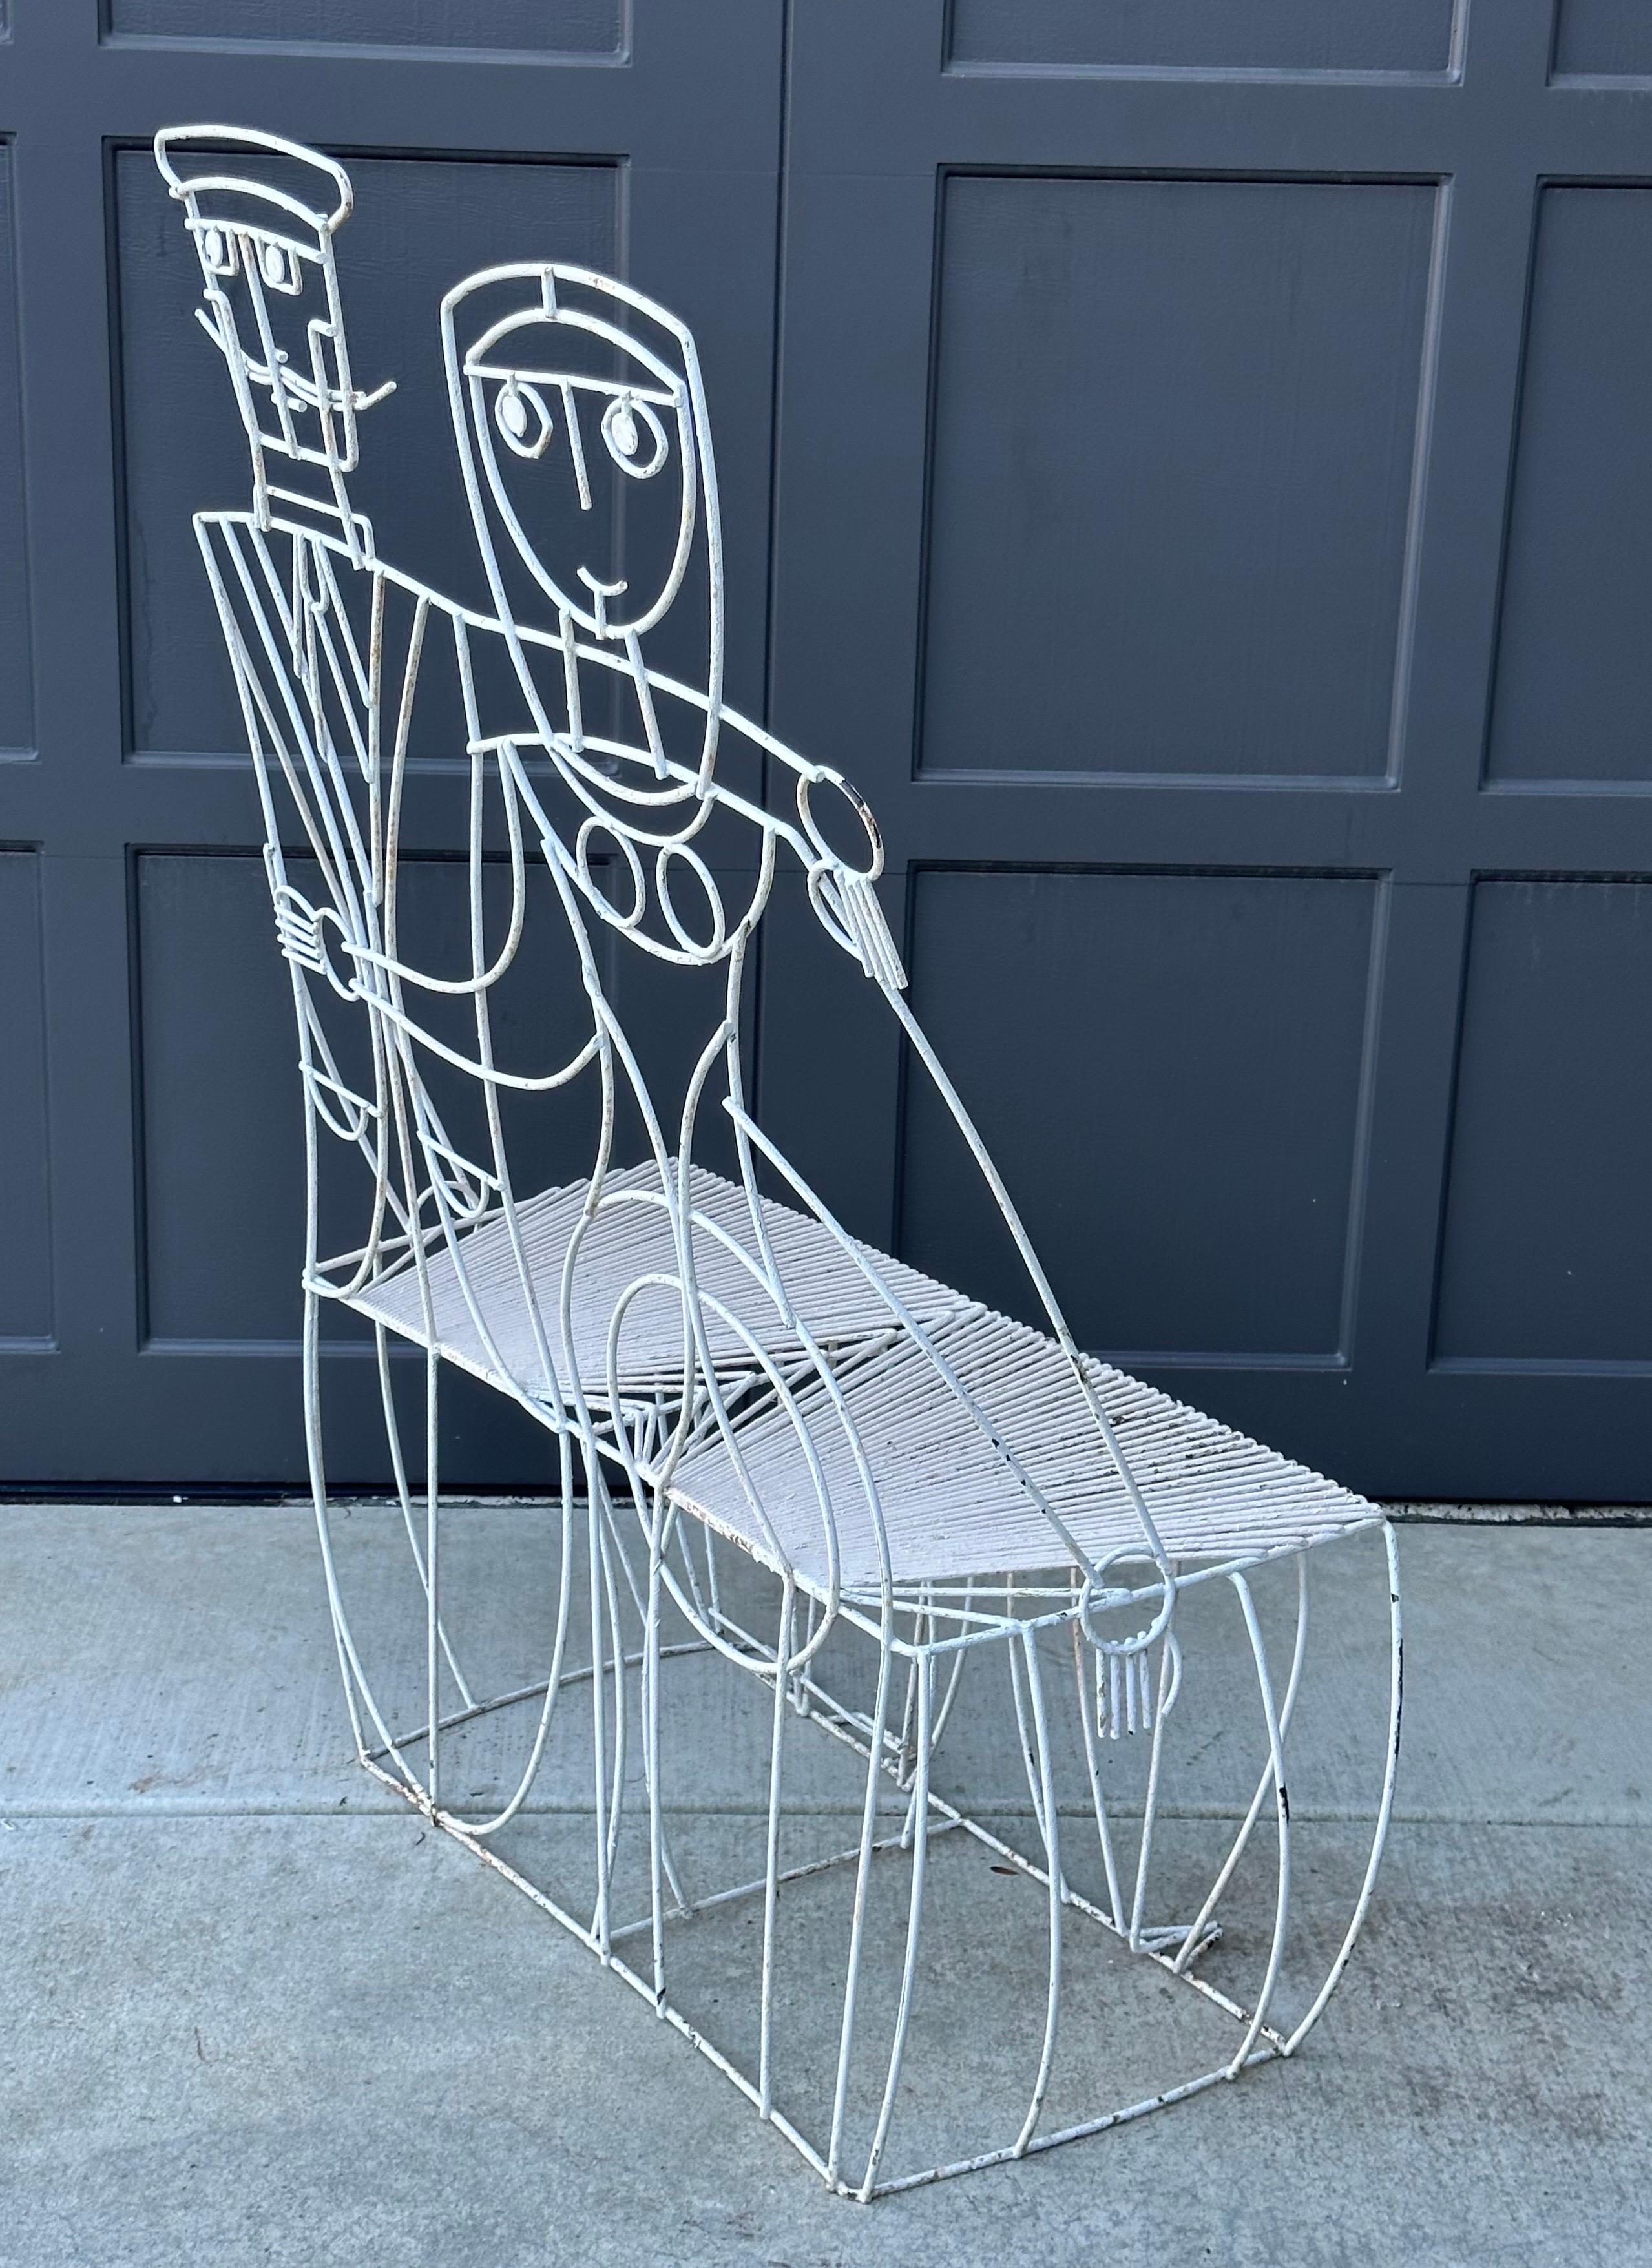 Whimsical Vintage Man & Woman Metal Wire Bench by John Risley For Sale 1